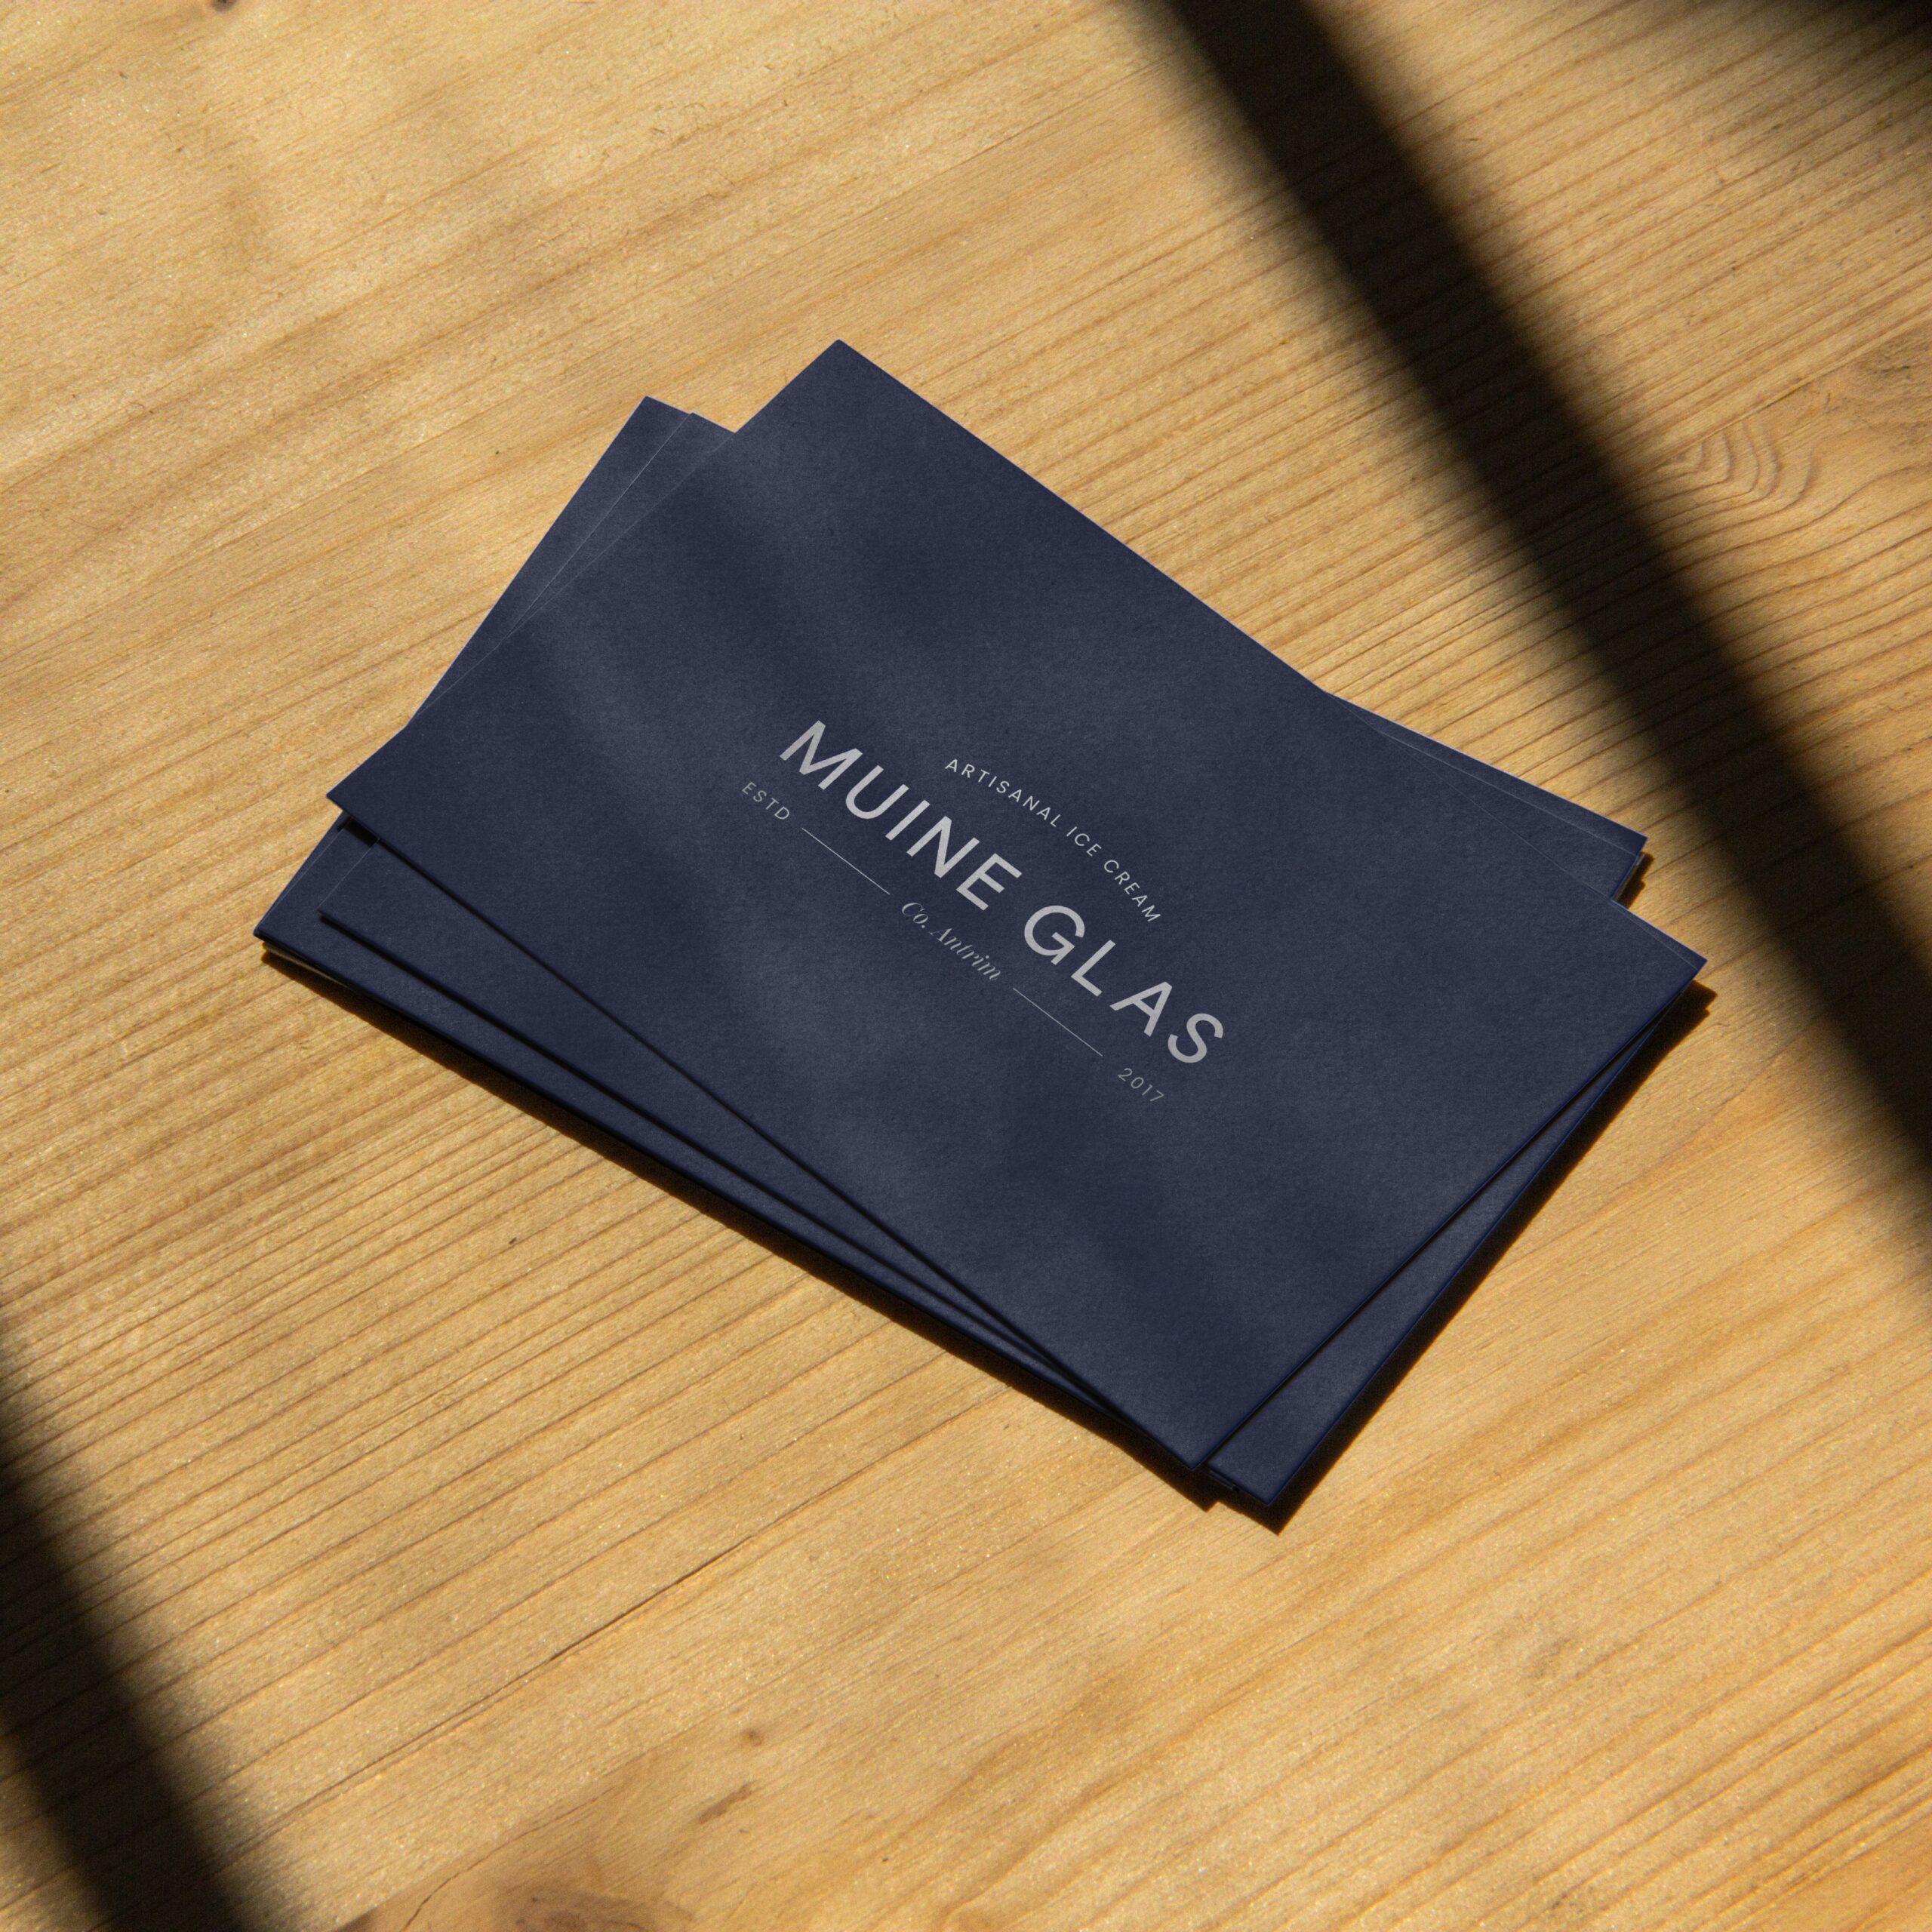 Muine Glas navy and white business card design